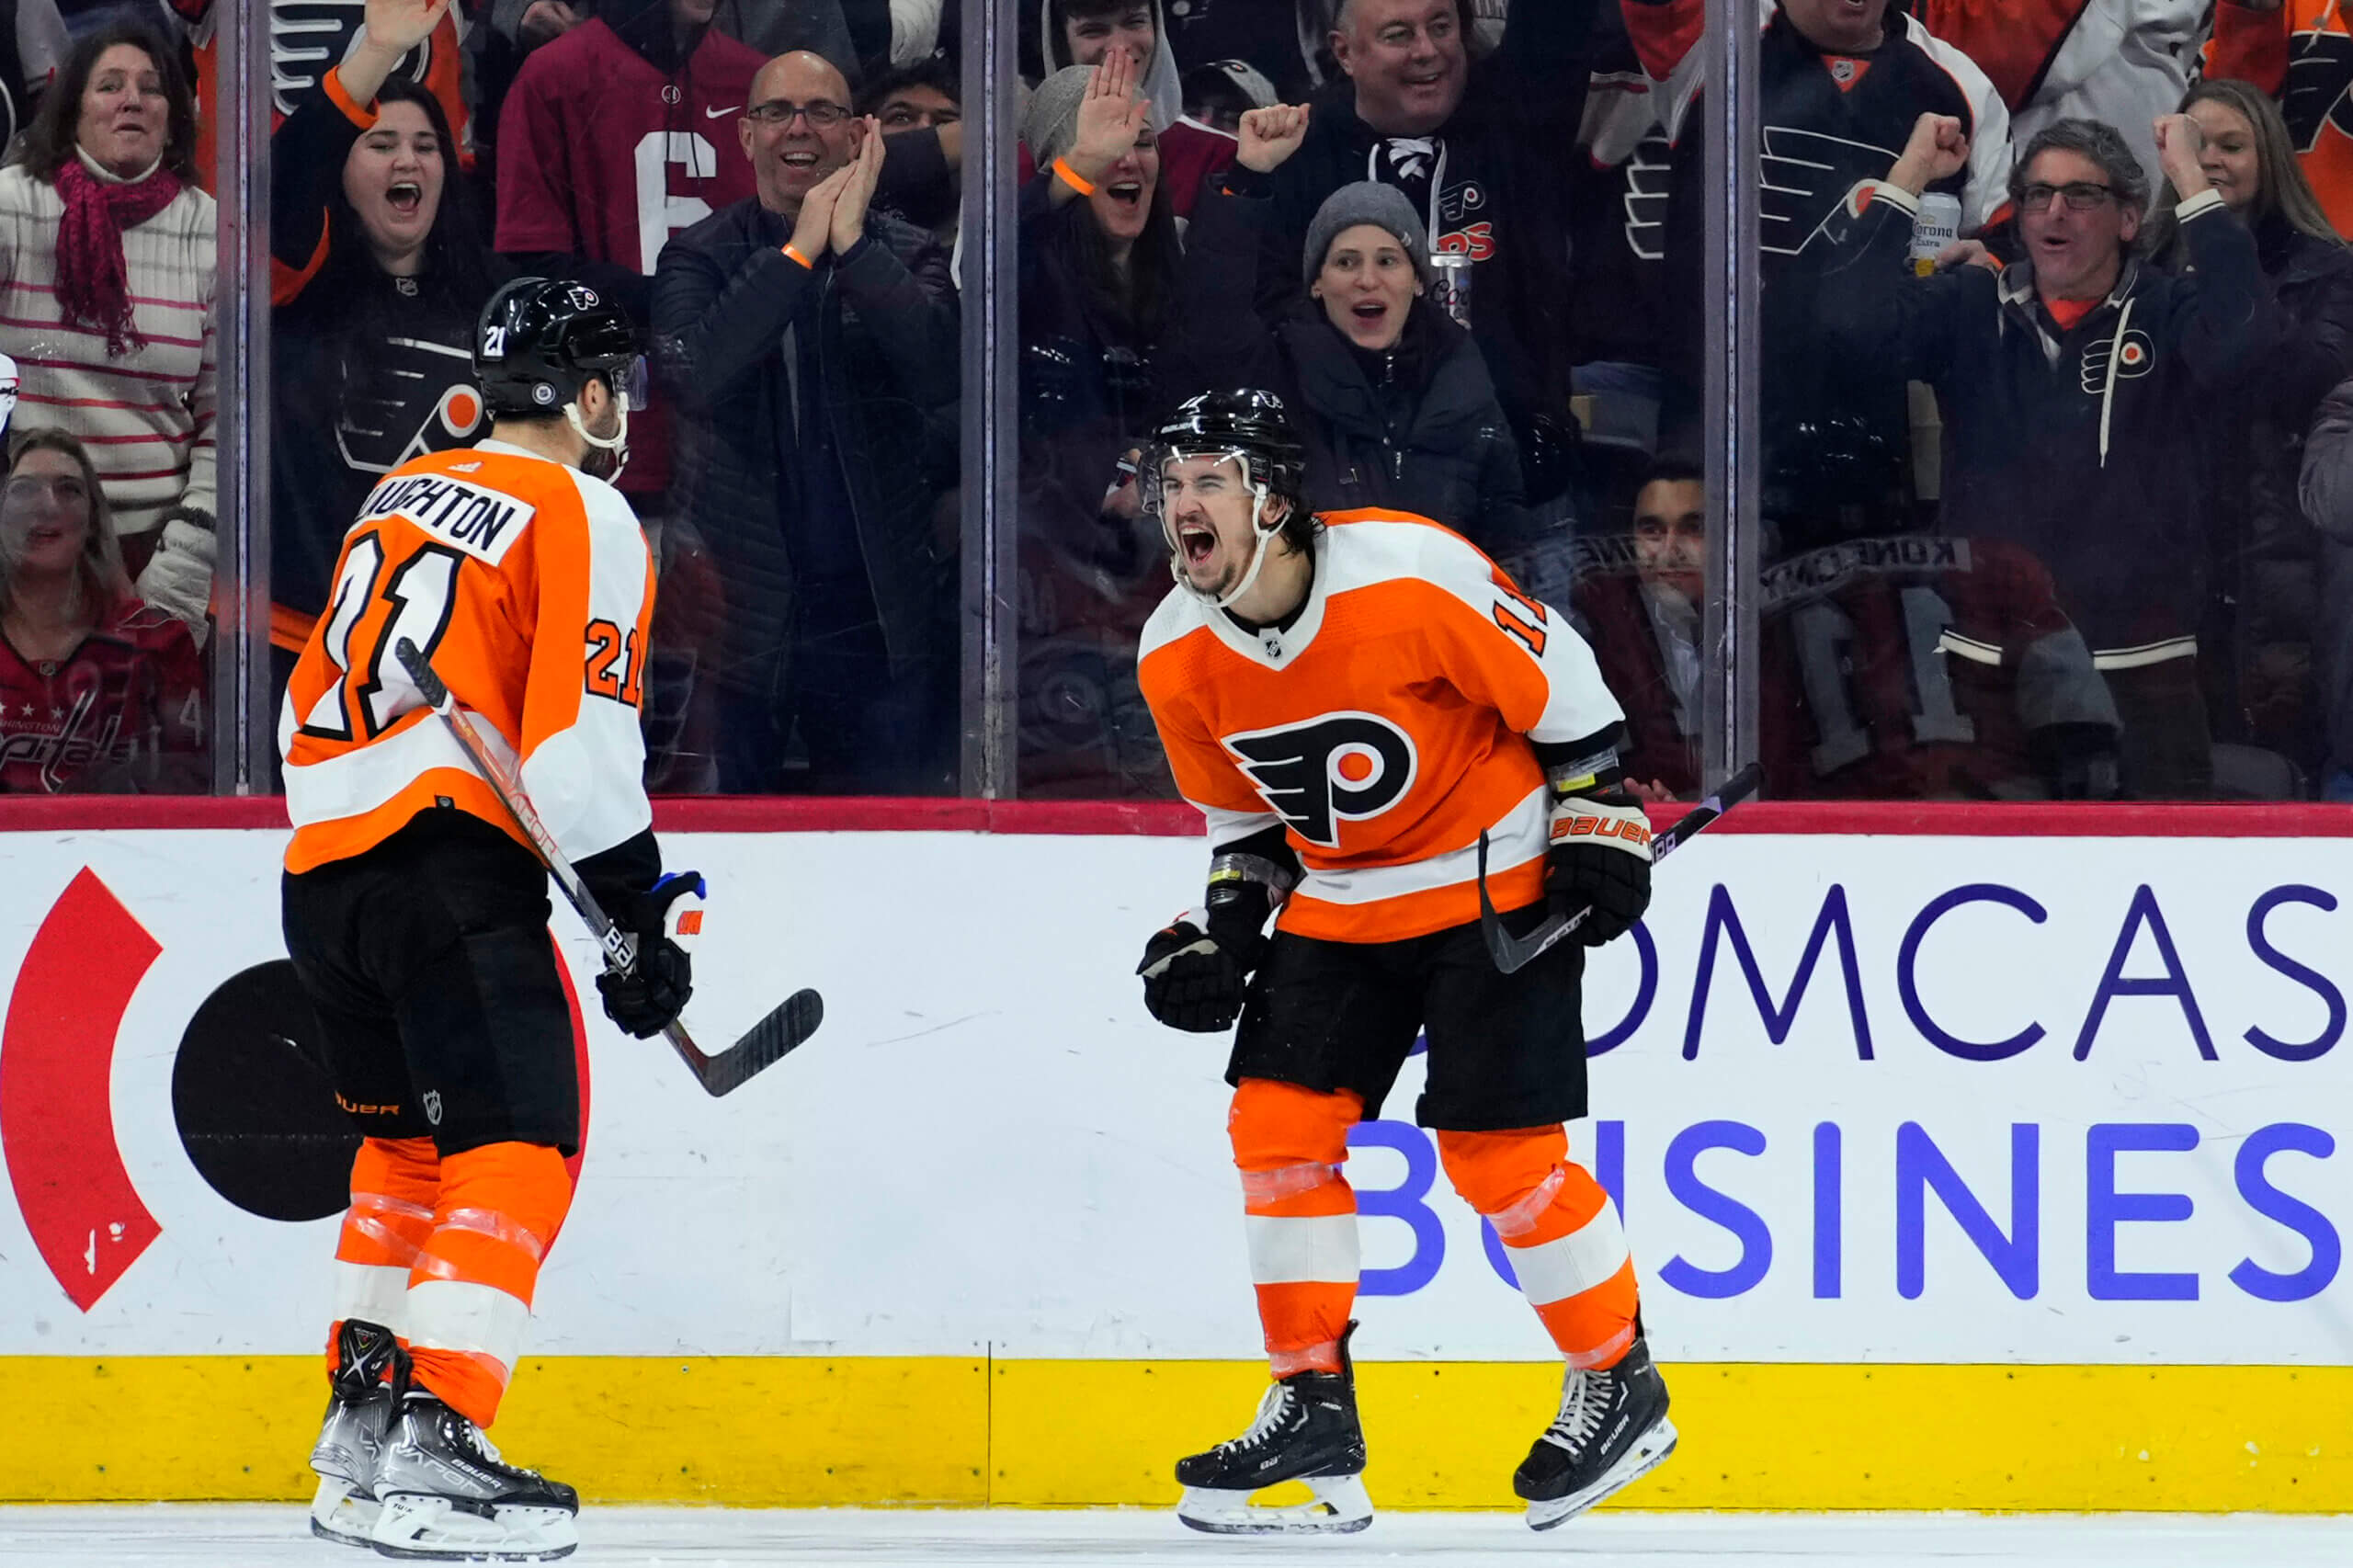 Flyers Rally Comes Too Little, Too Late In Loss To Capitals